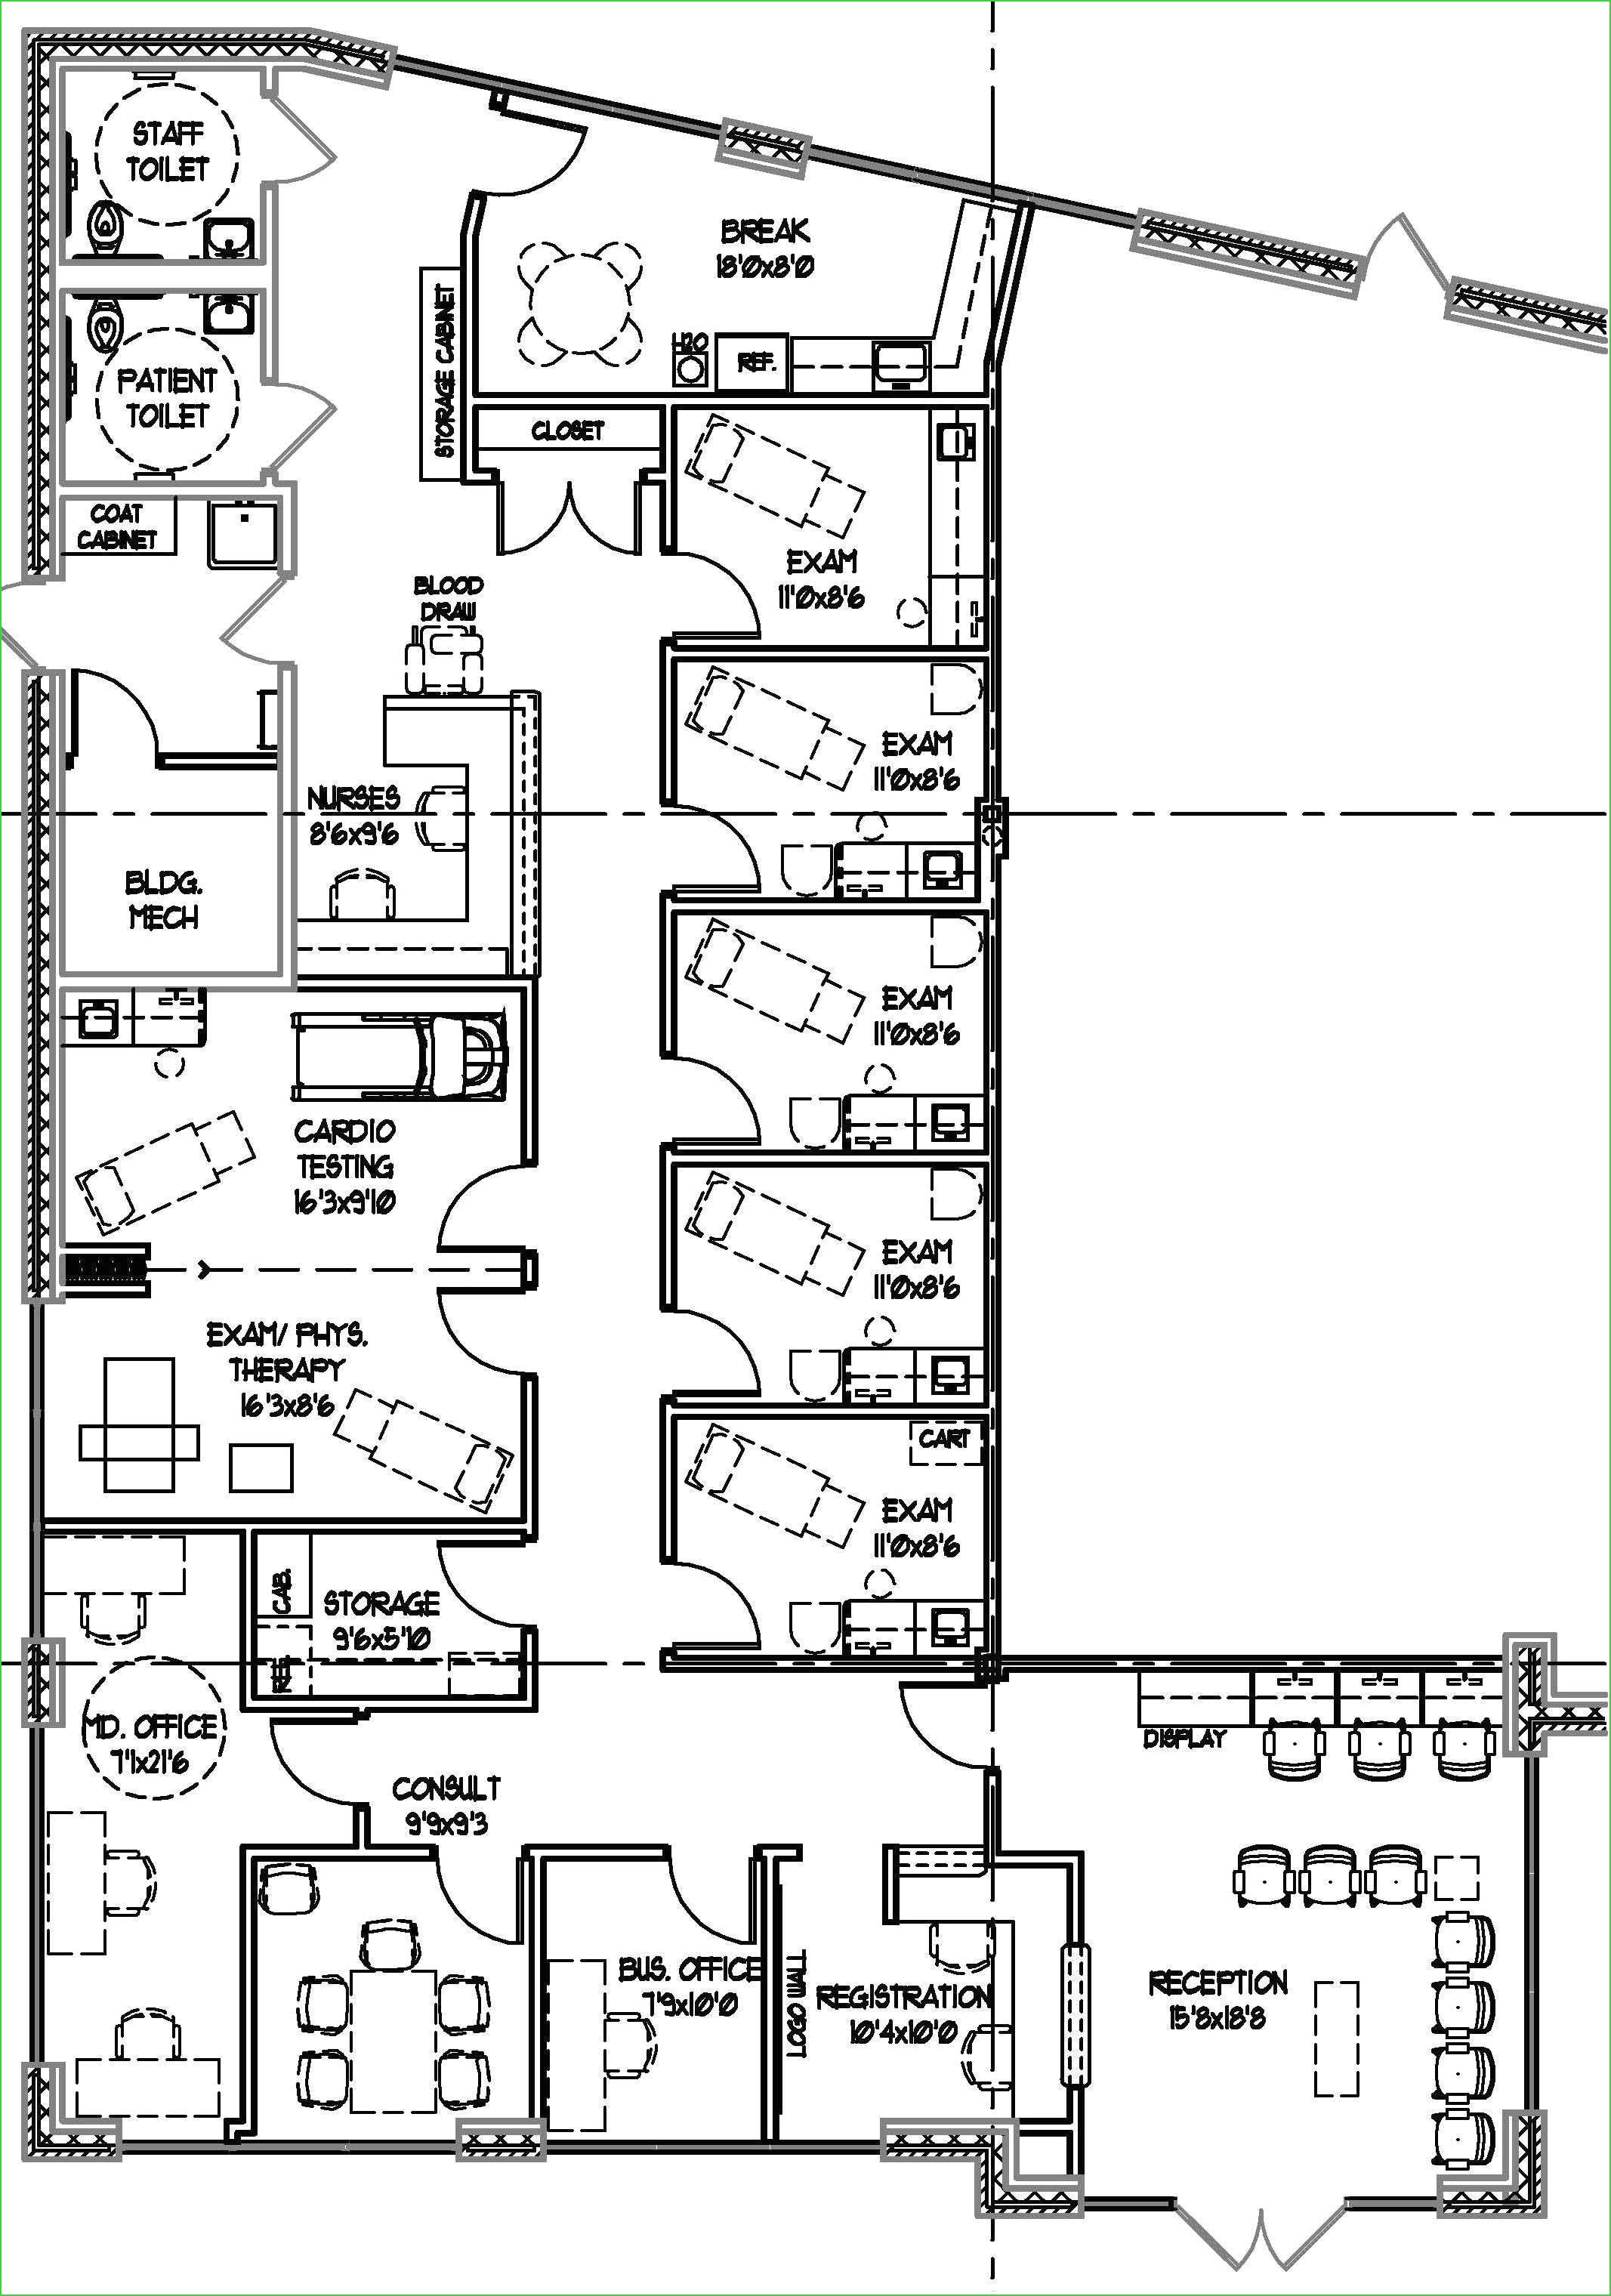 Drawing Your Own Blood 20 Incredible Design My Own Floor Plan Design Floor Plan Design